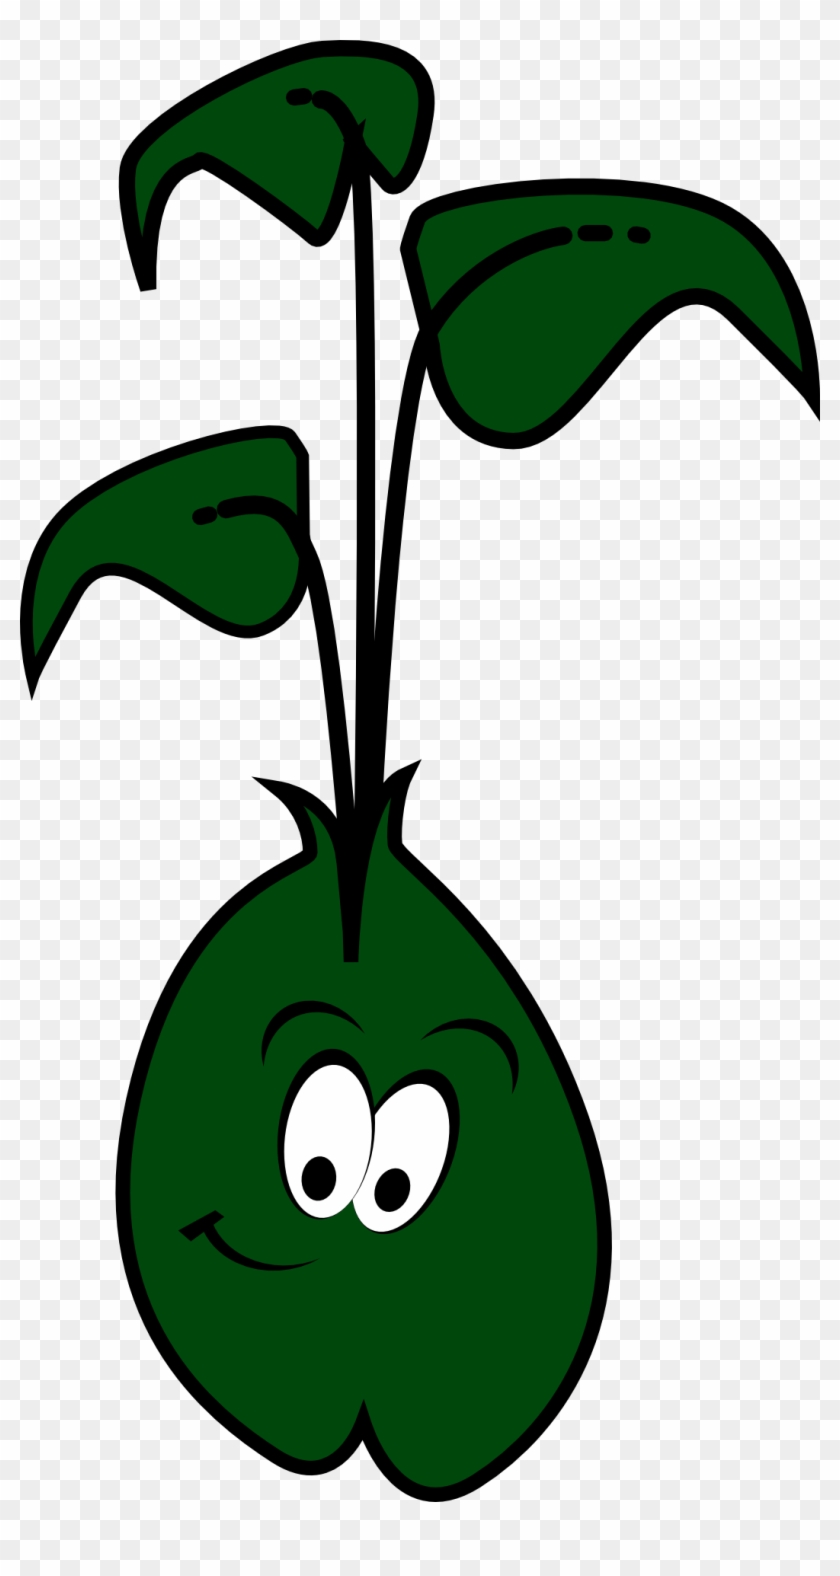 Bean Sprout Character Clip Art At Clkercom Vector Online - Bean Sprout Clipart #224756